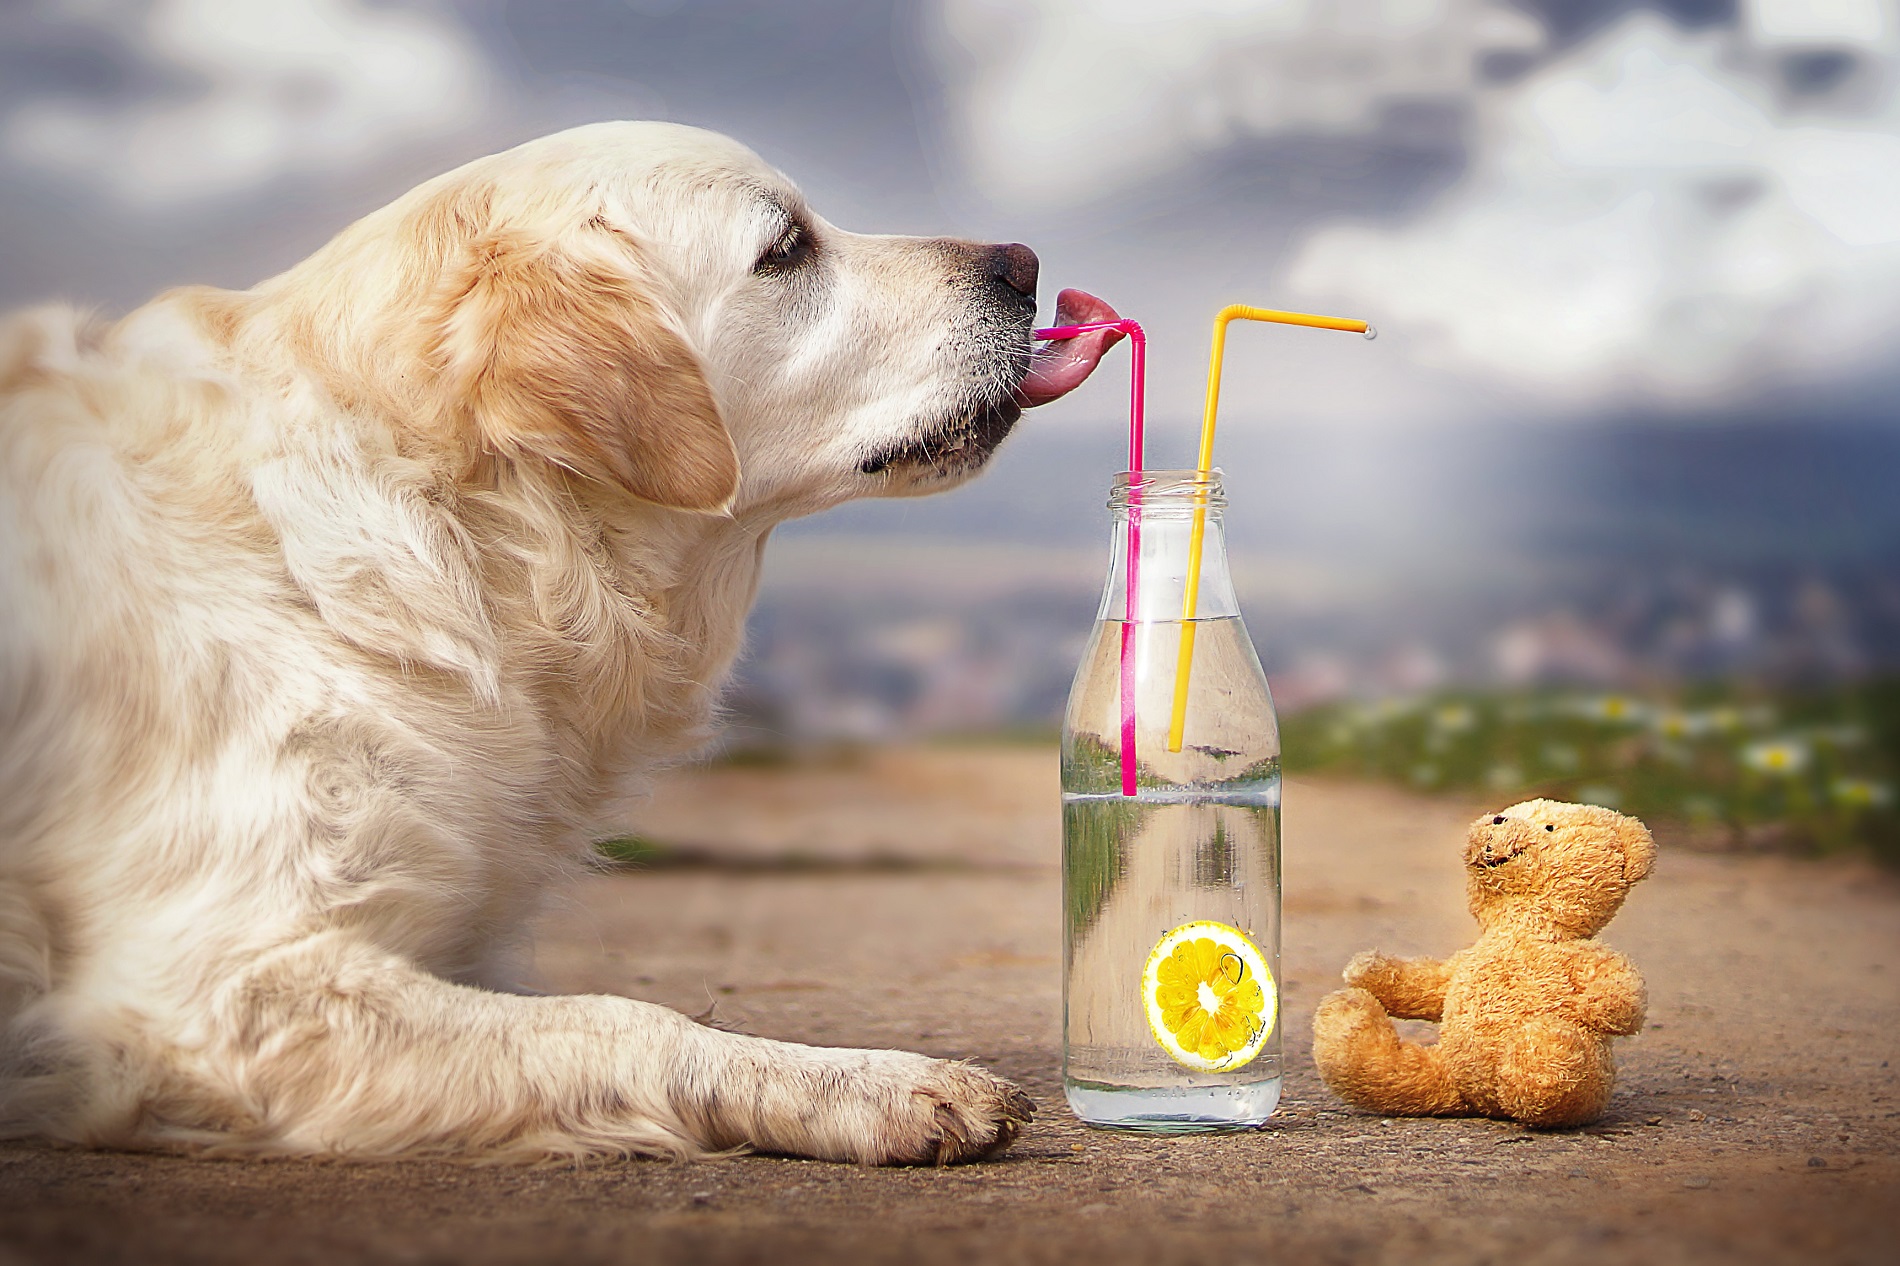 Cute dog with a bottle of lemonade